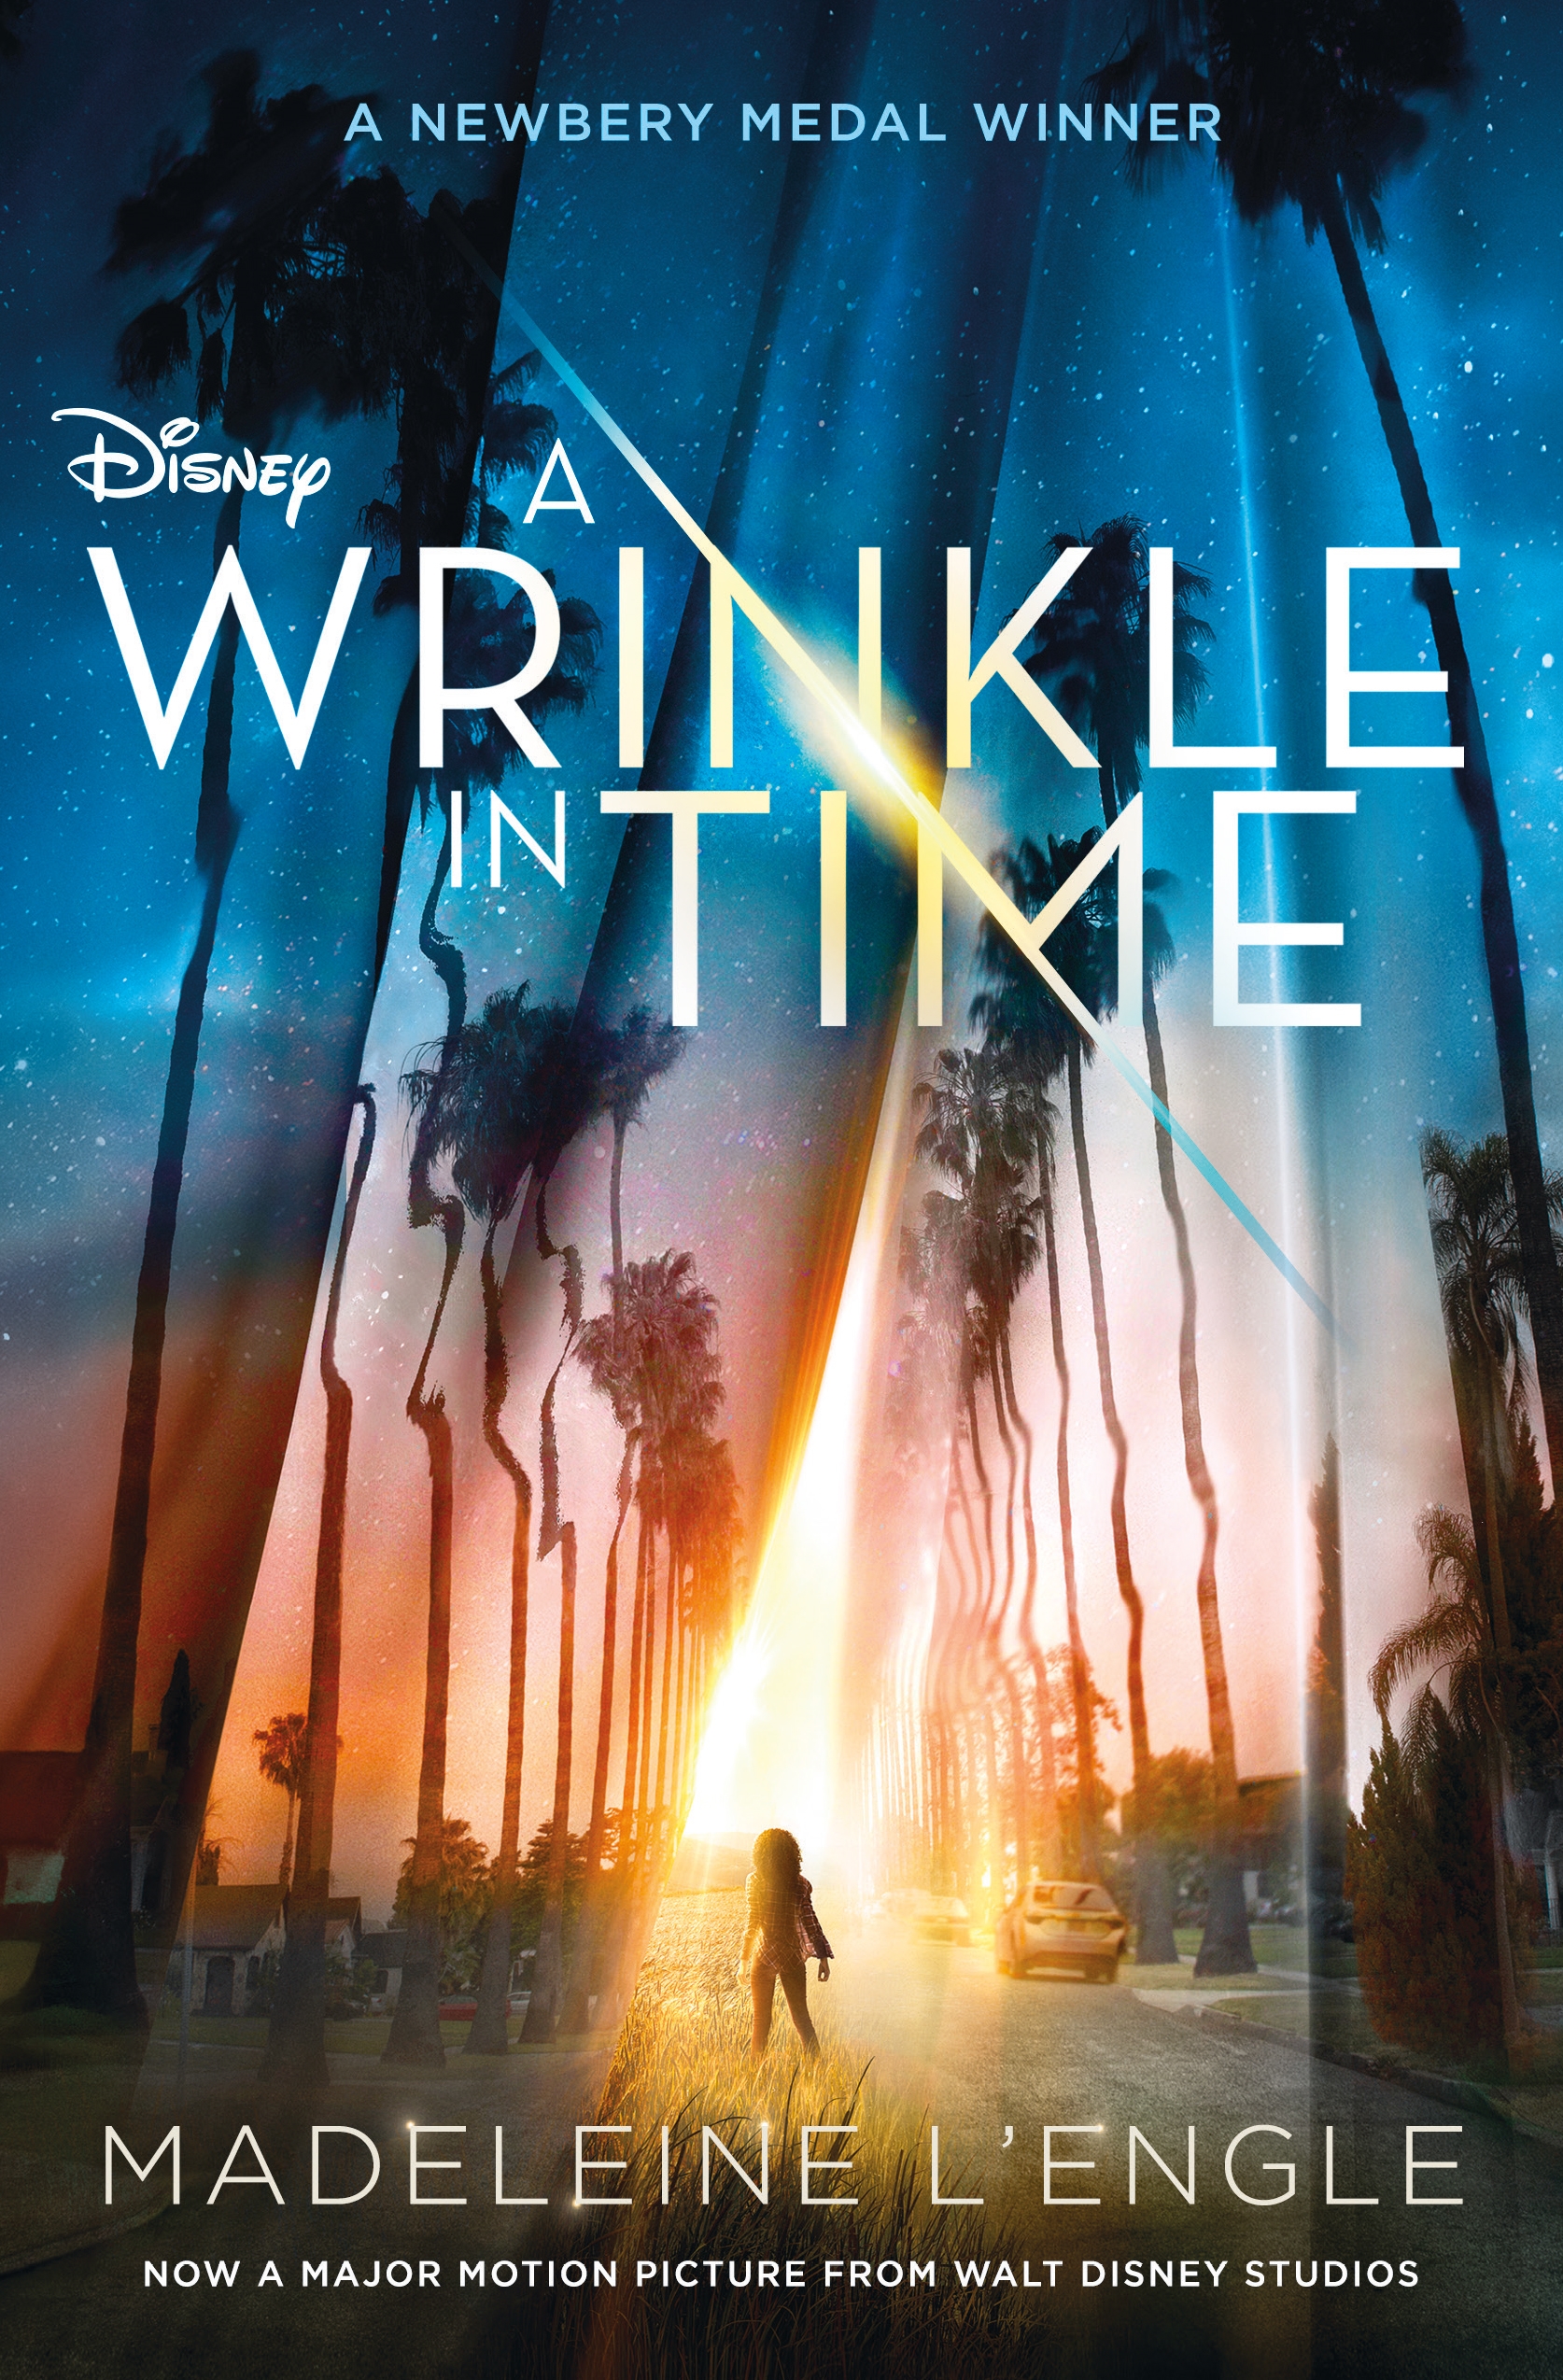 Book “A Wrinkle in Time Movie Tie-In Edition” by Madeleine L'Engle — January 30, 2018